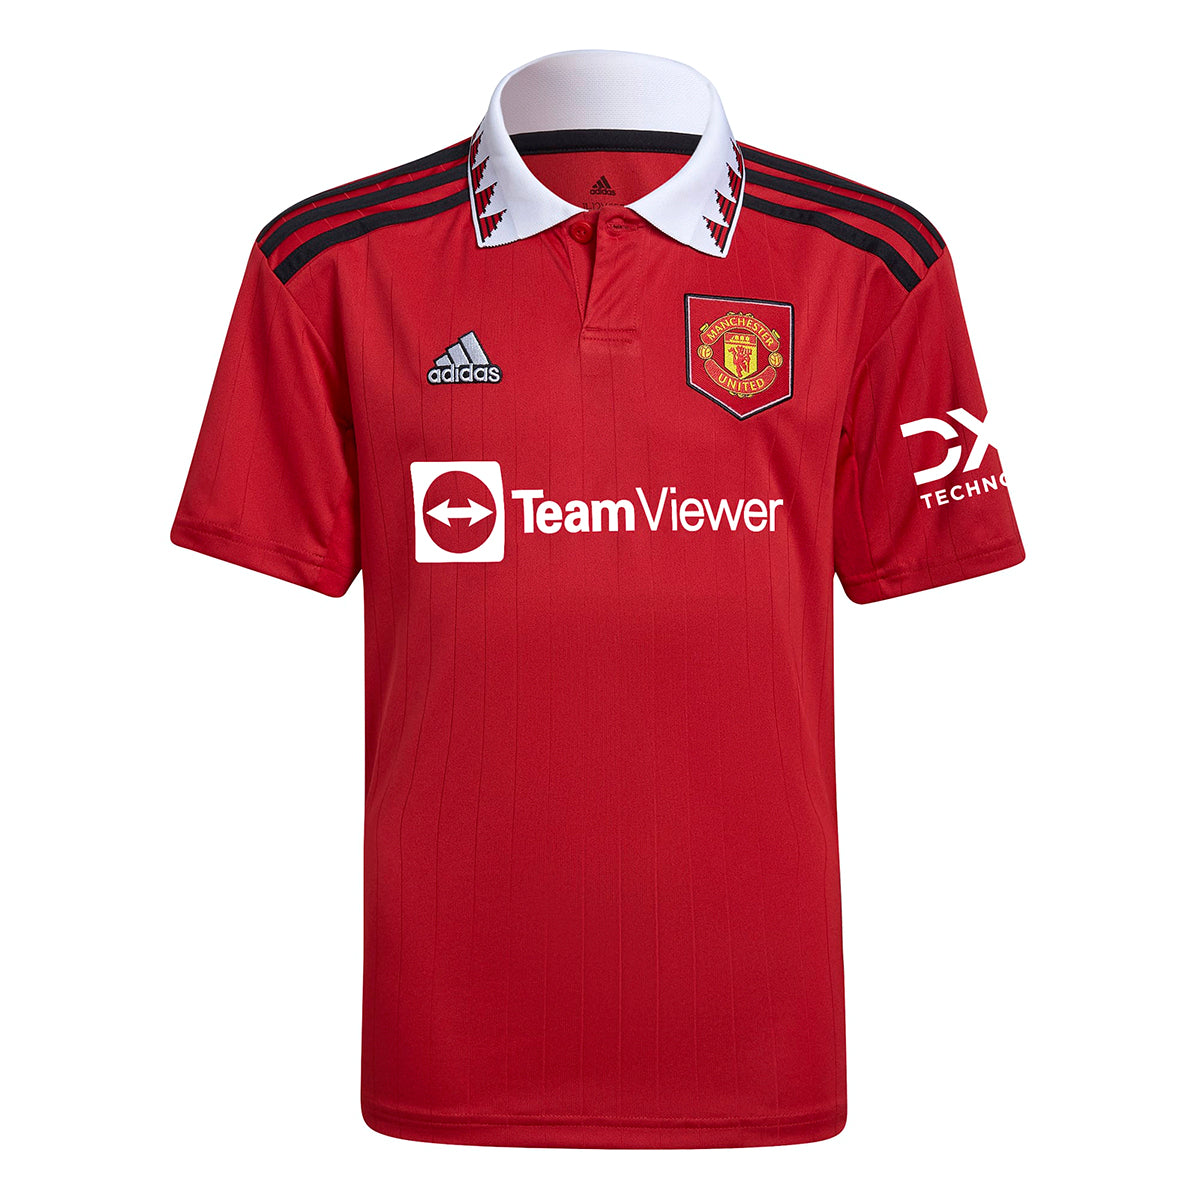 adidas Youth 22/23 Manchester United Home Jersey | H64049 Jersey Adidas Youth Medium Real Red 